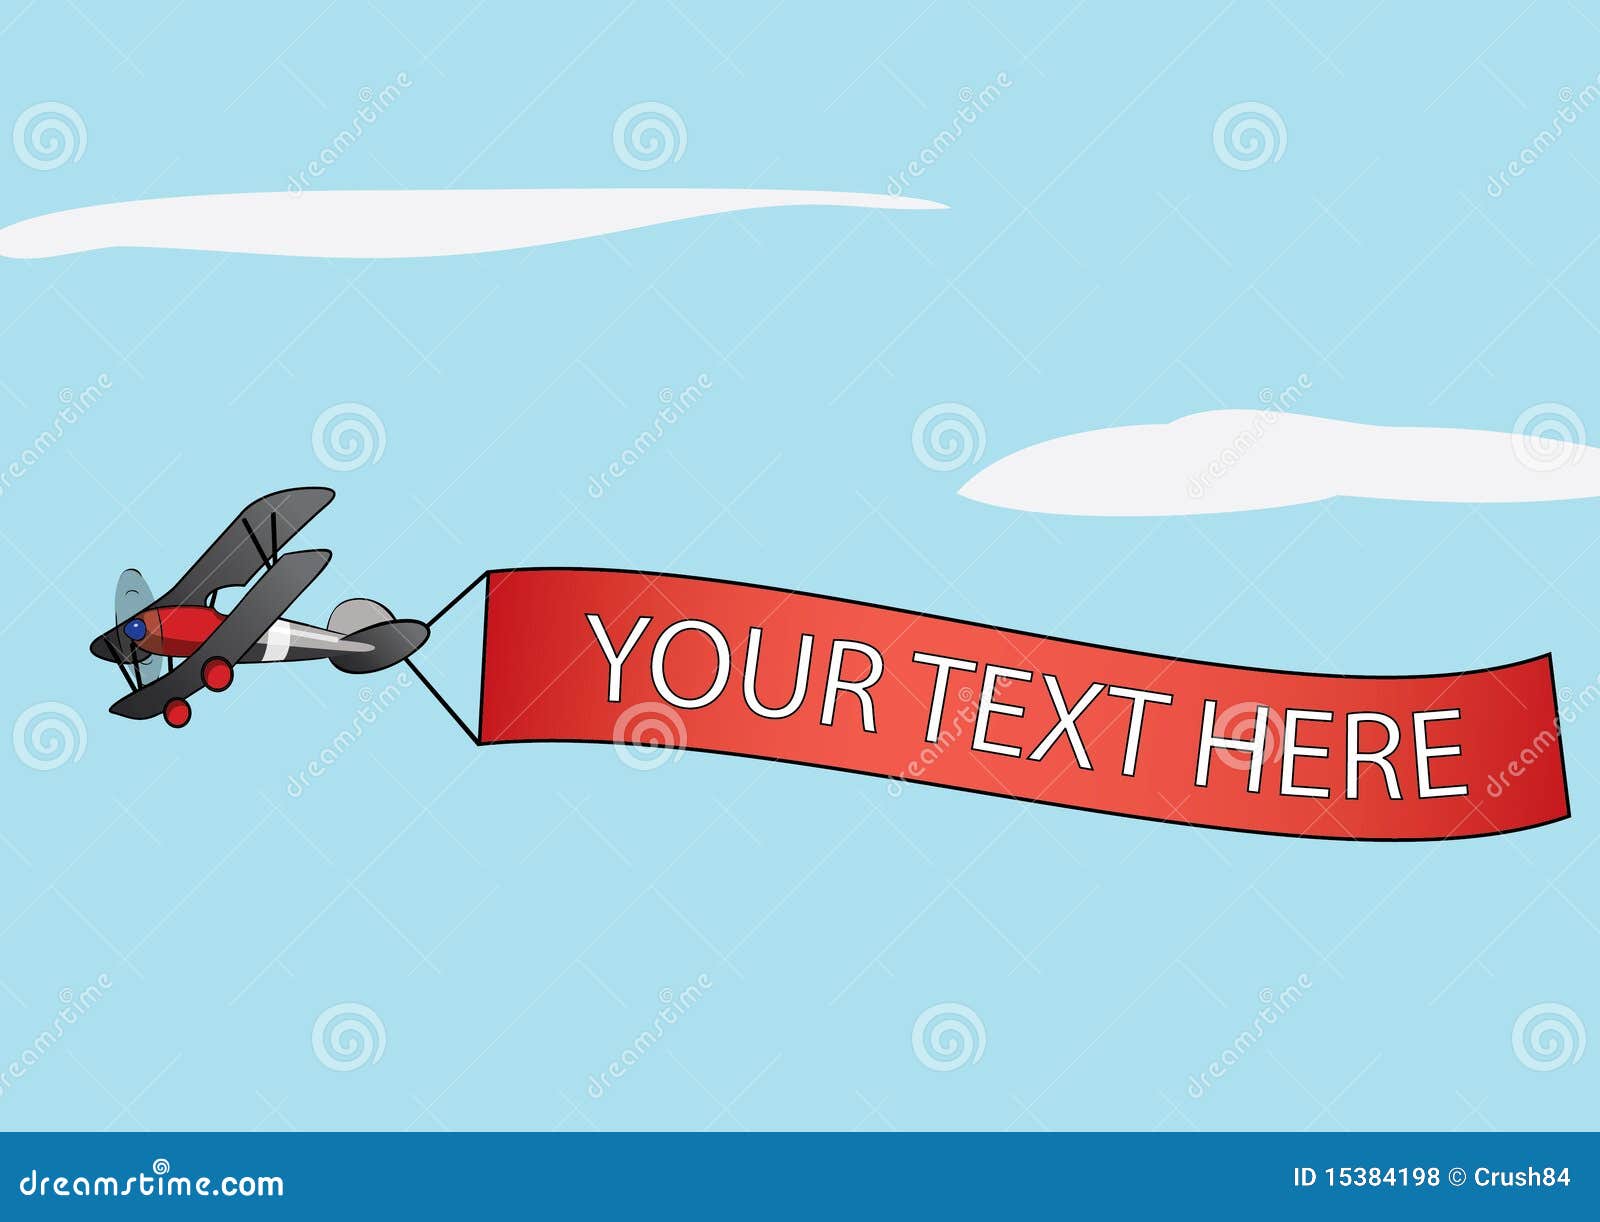 clipart plane with banner - photo #11